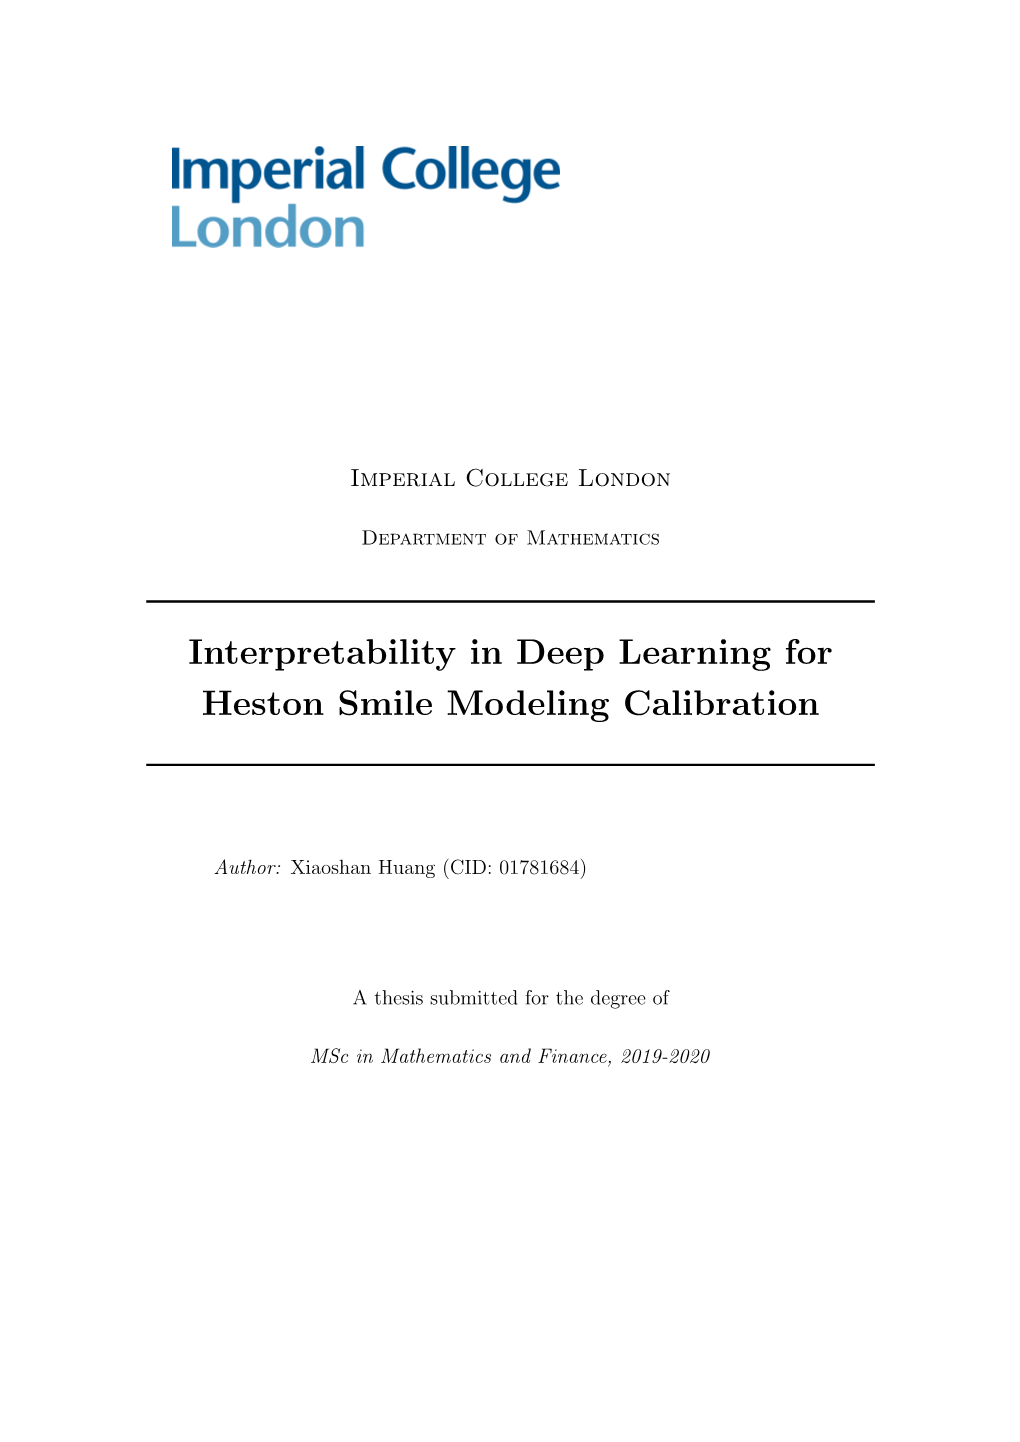 Interpretability in Deep Learning for Heston Smile Modeling Calibration